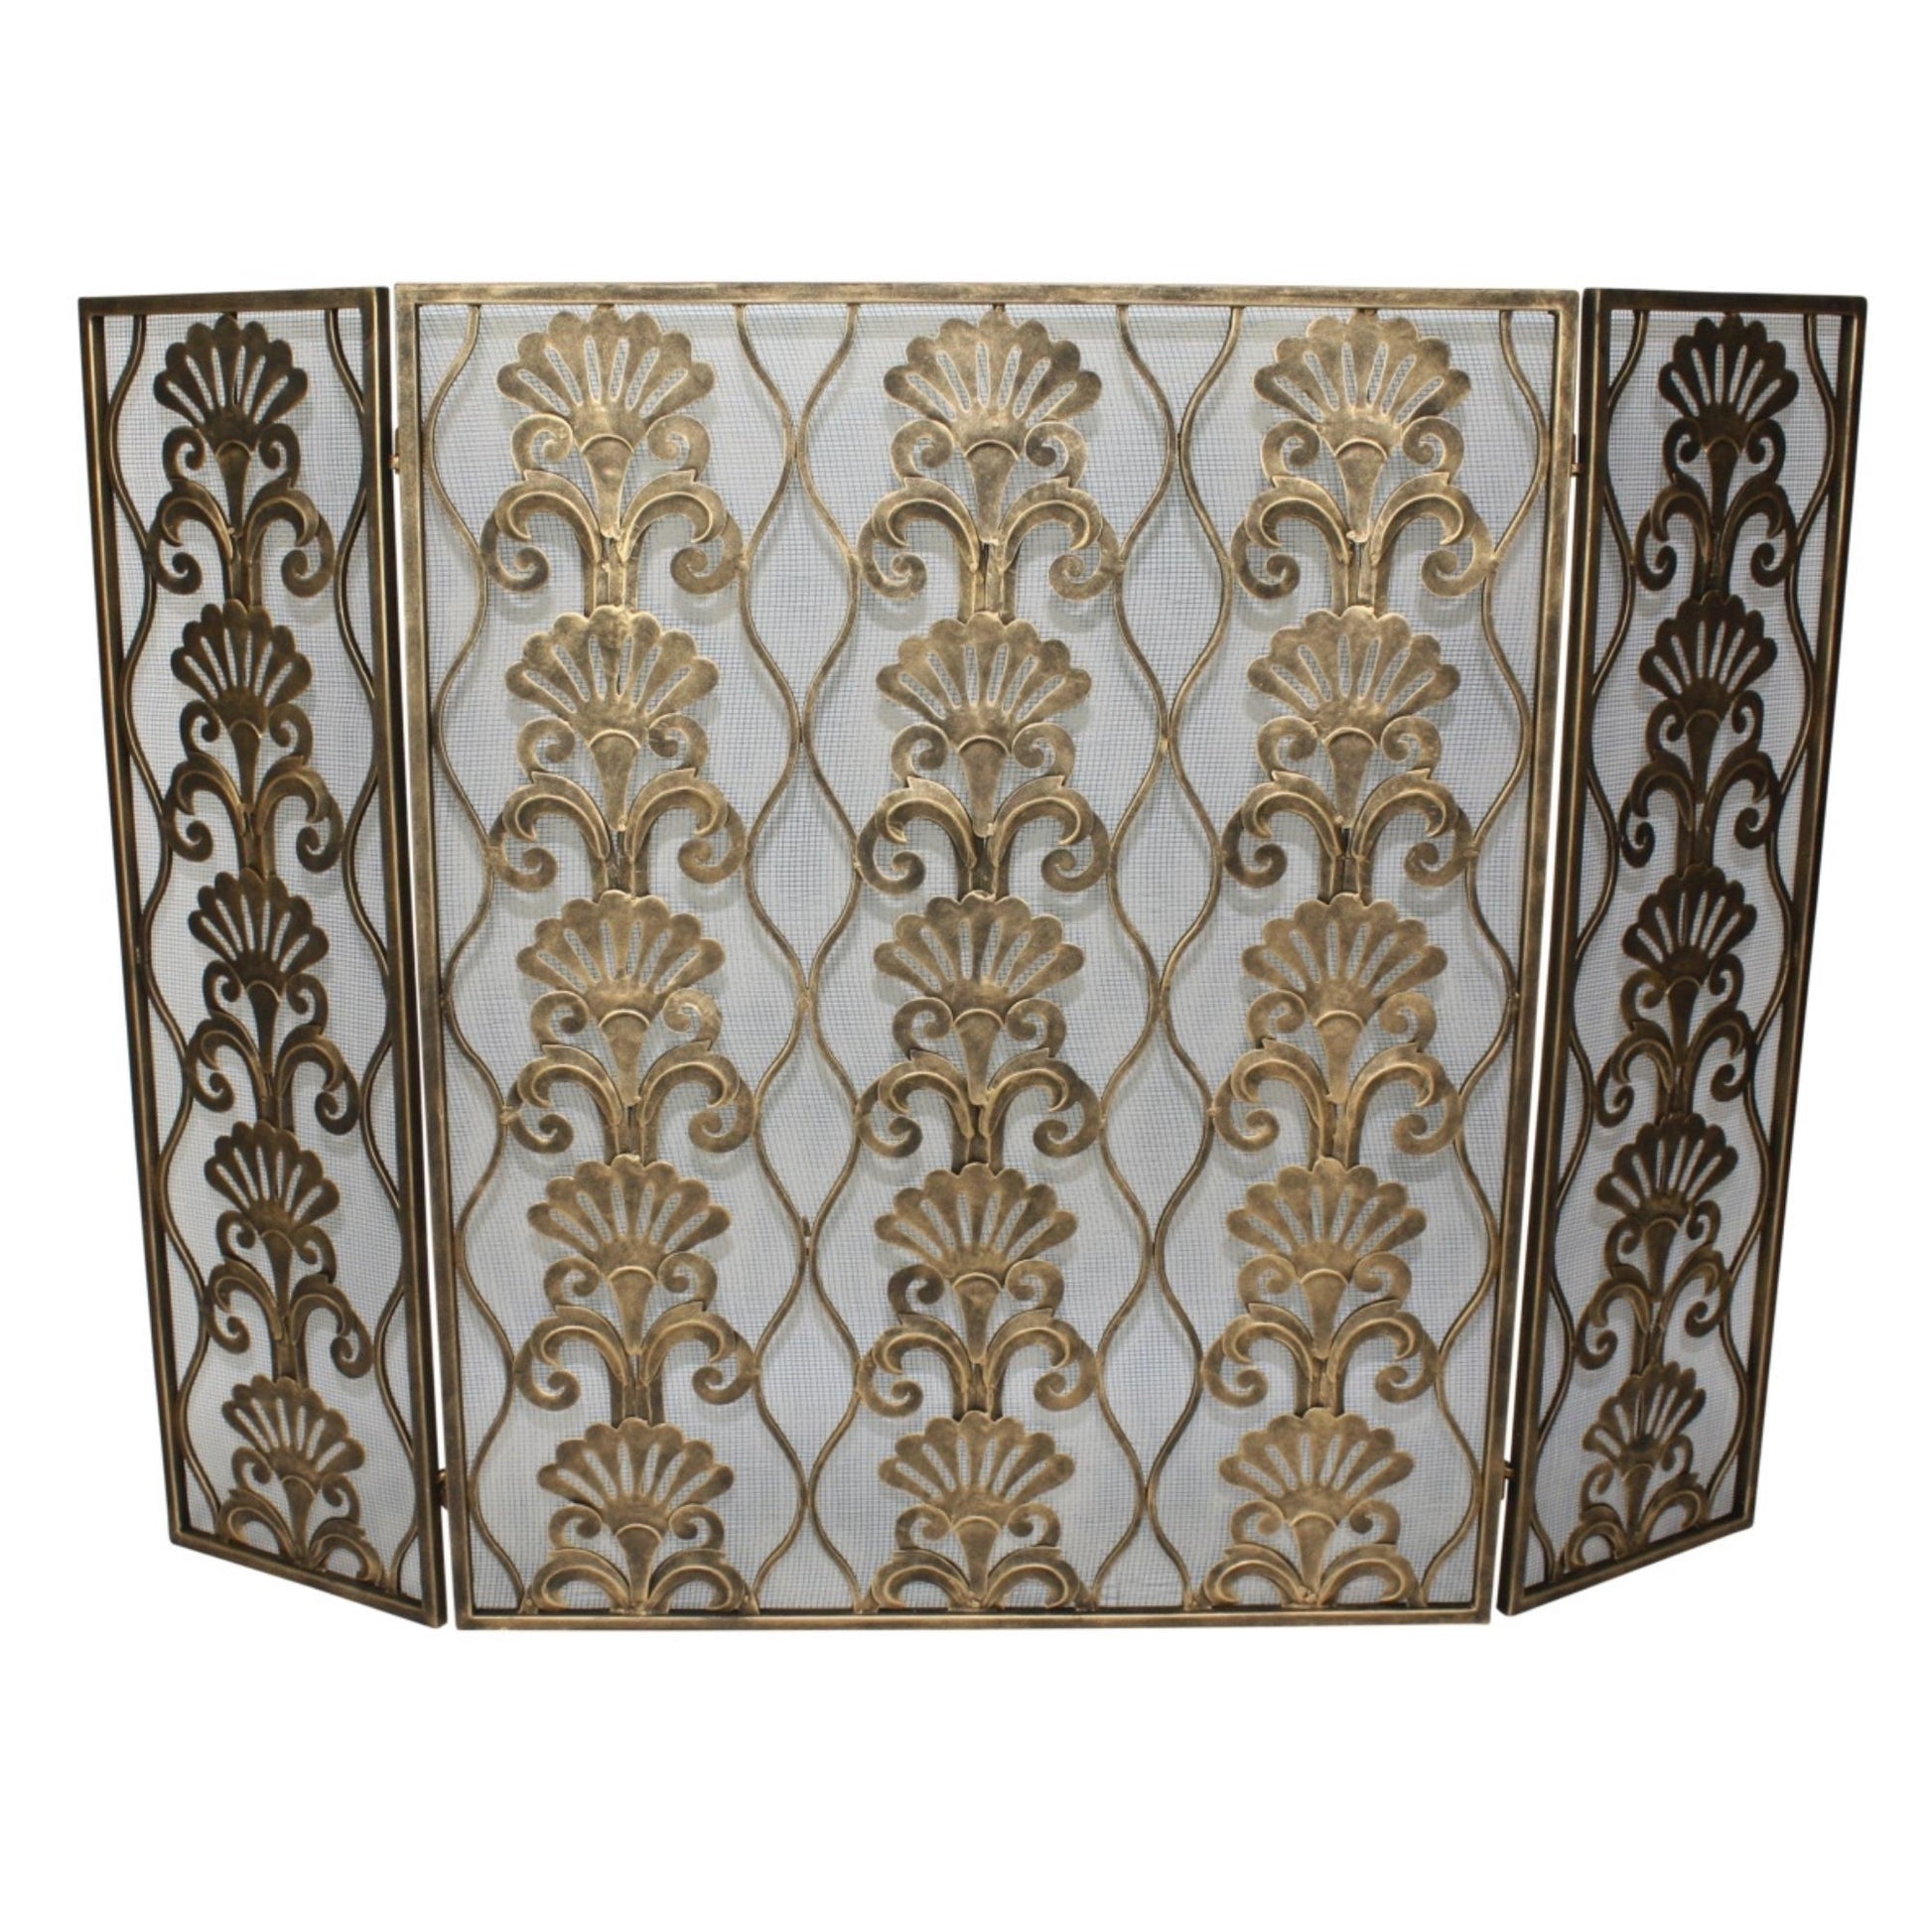 Three Panel Iron Fireplace Screen with Shell Accent Design - Light Burnished Gold | InsideOutCatalog.com